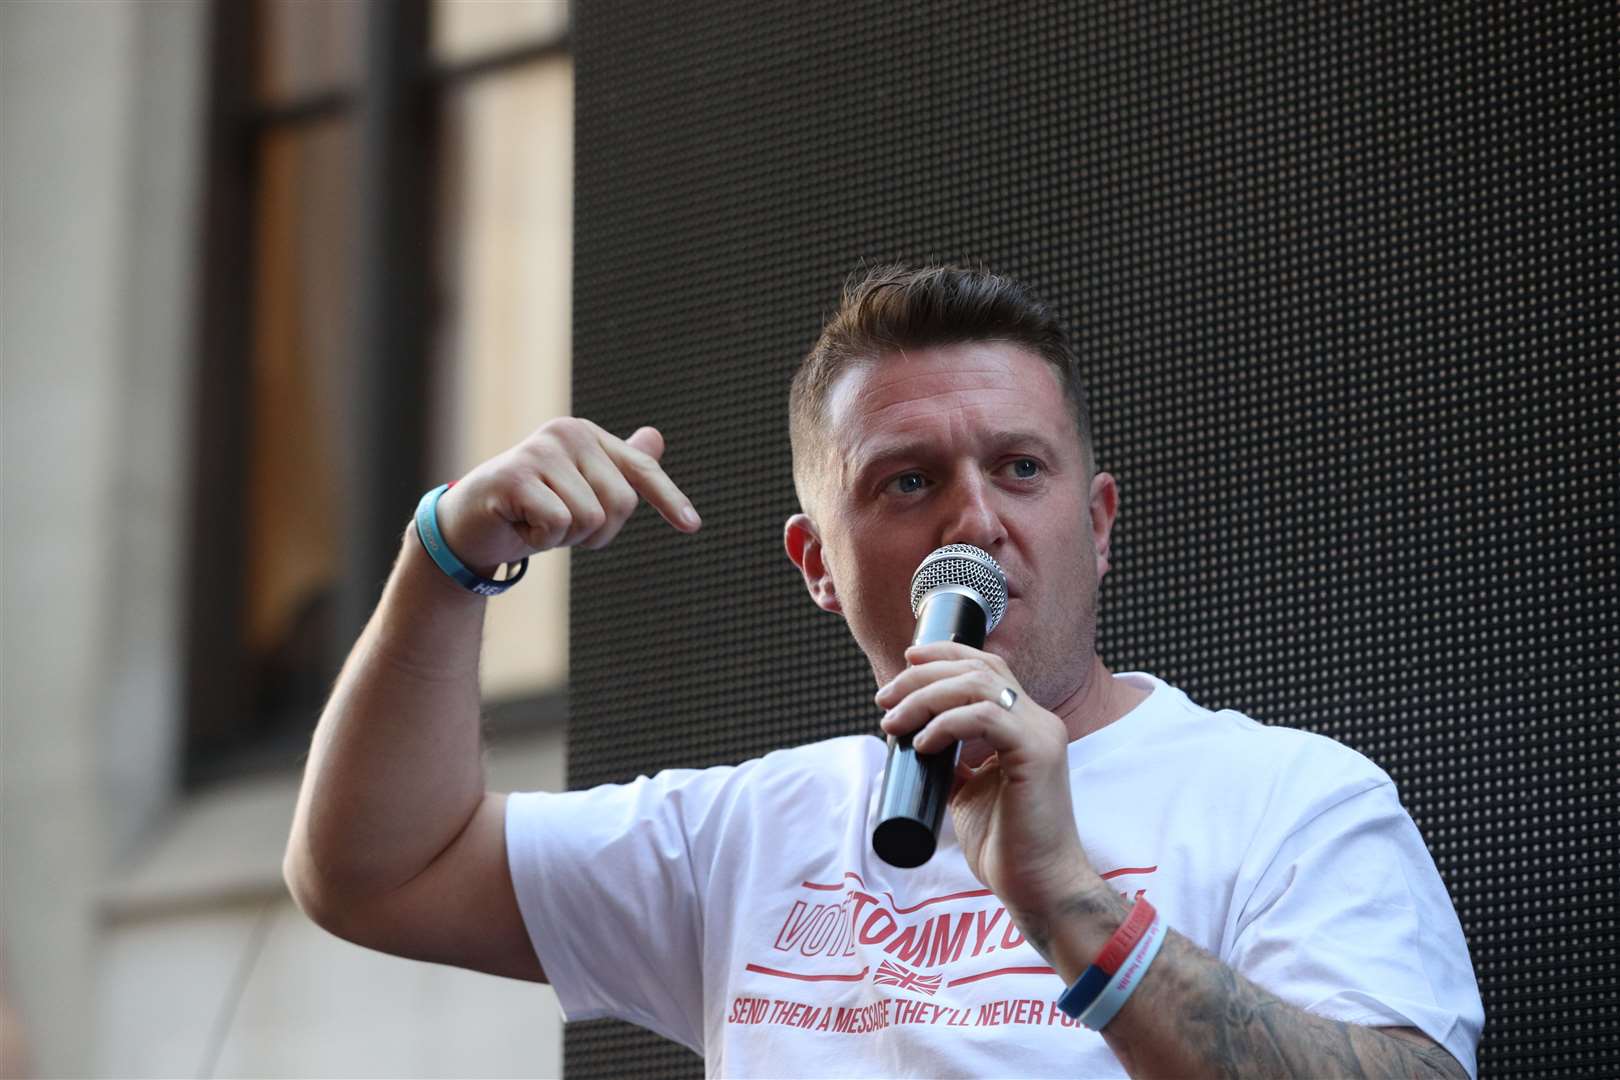 Stephen Yaxley-Lennon co-founded the far-right English Defence League in 2009 (Jonathan Brady/PA)